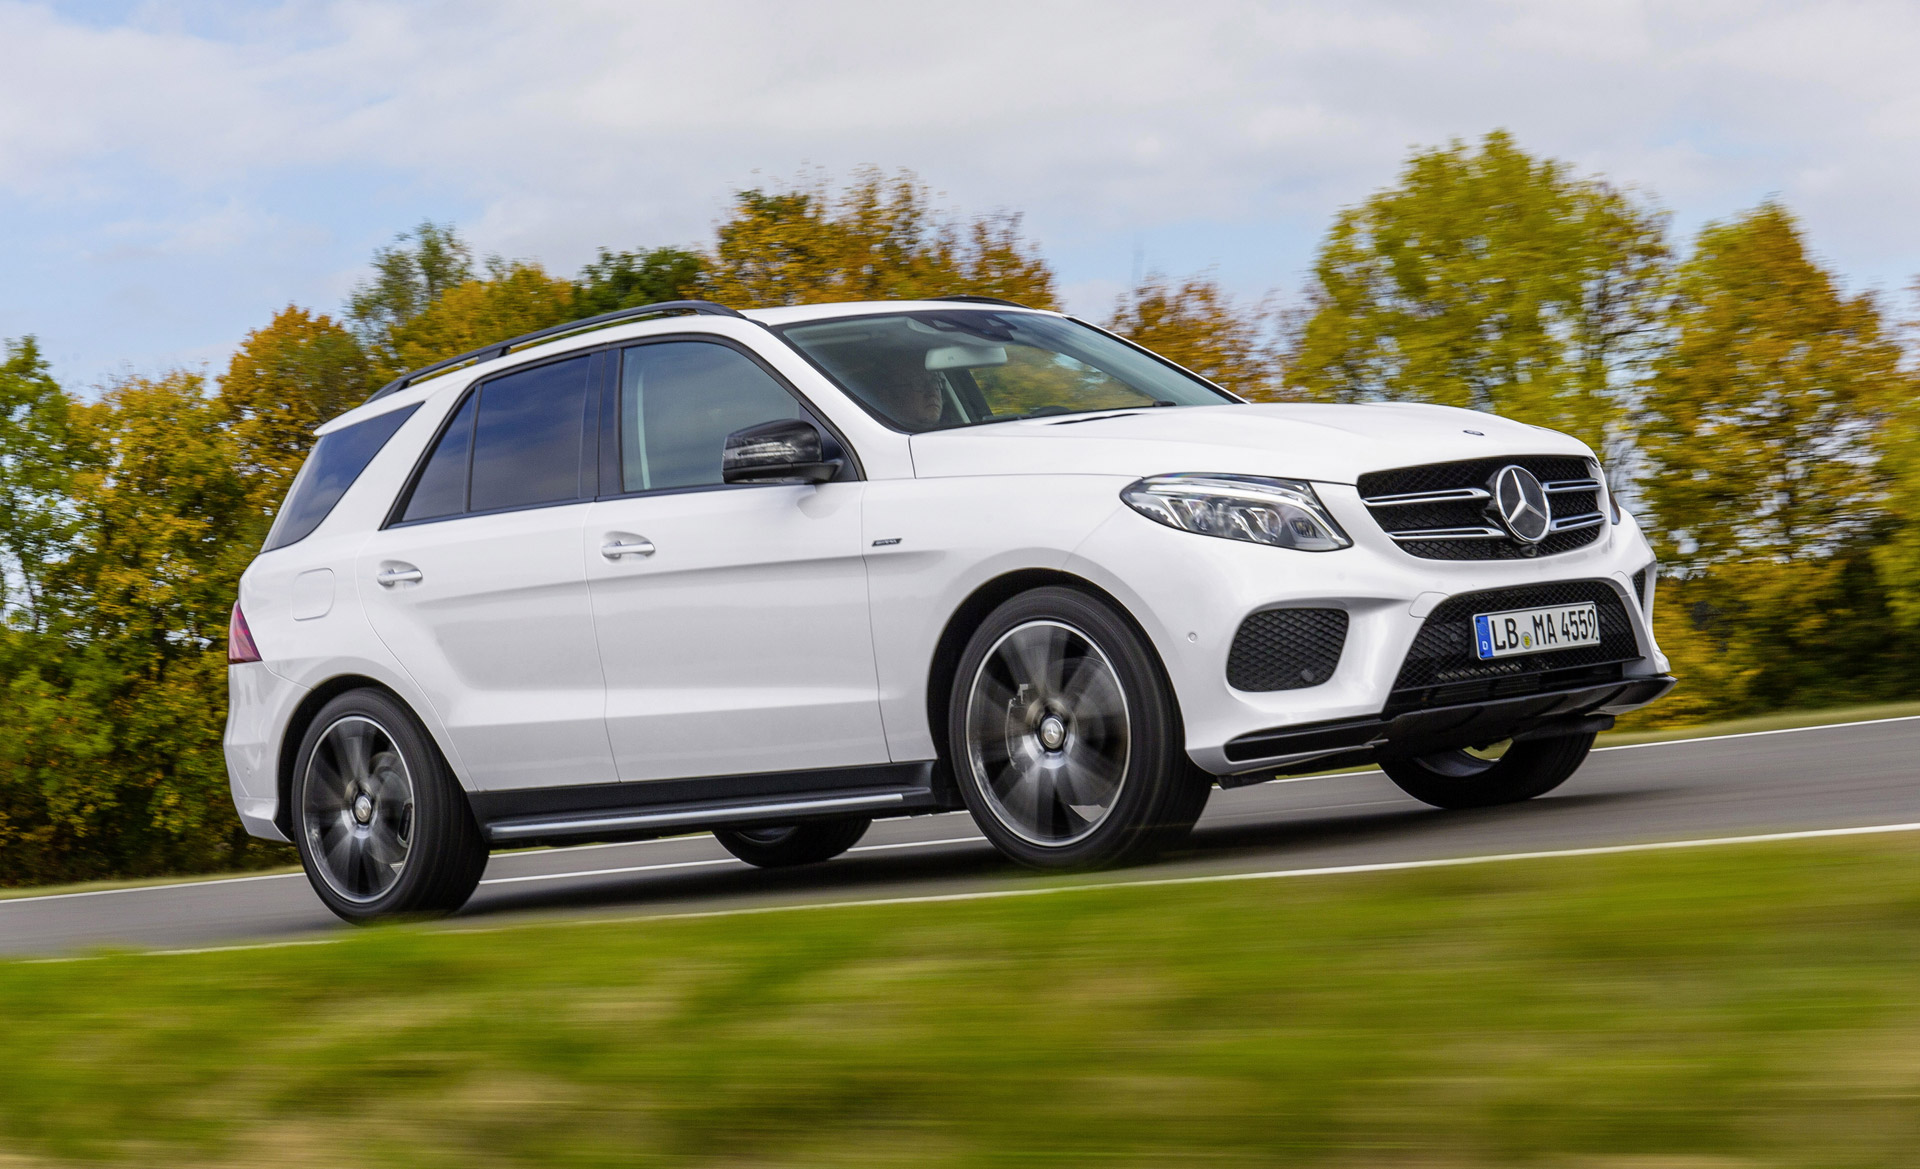 2016 Mercedes Benz Gle450 Amg 4matic Joins Growing Amg Sport